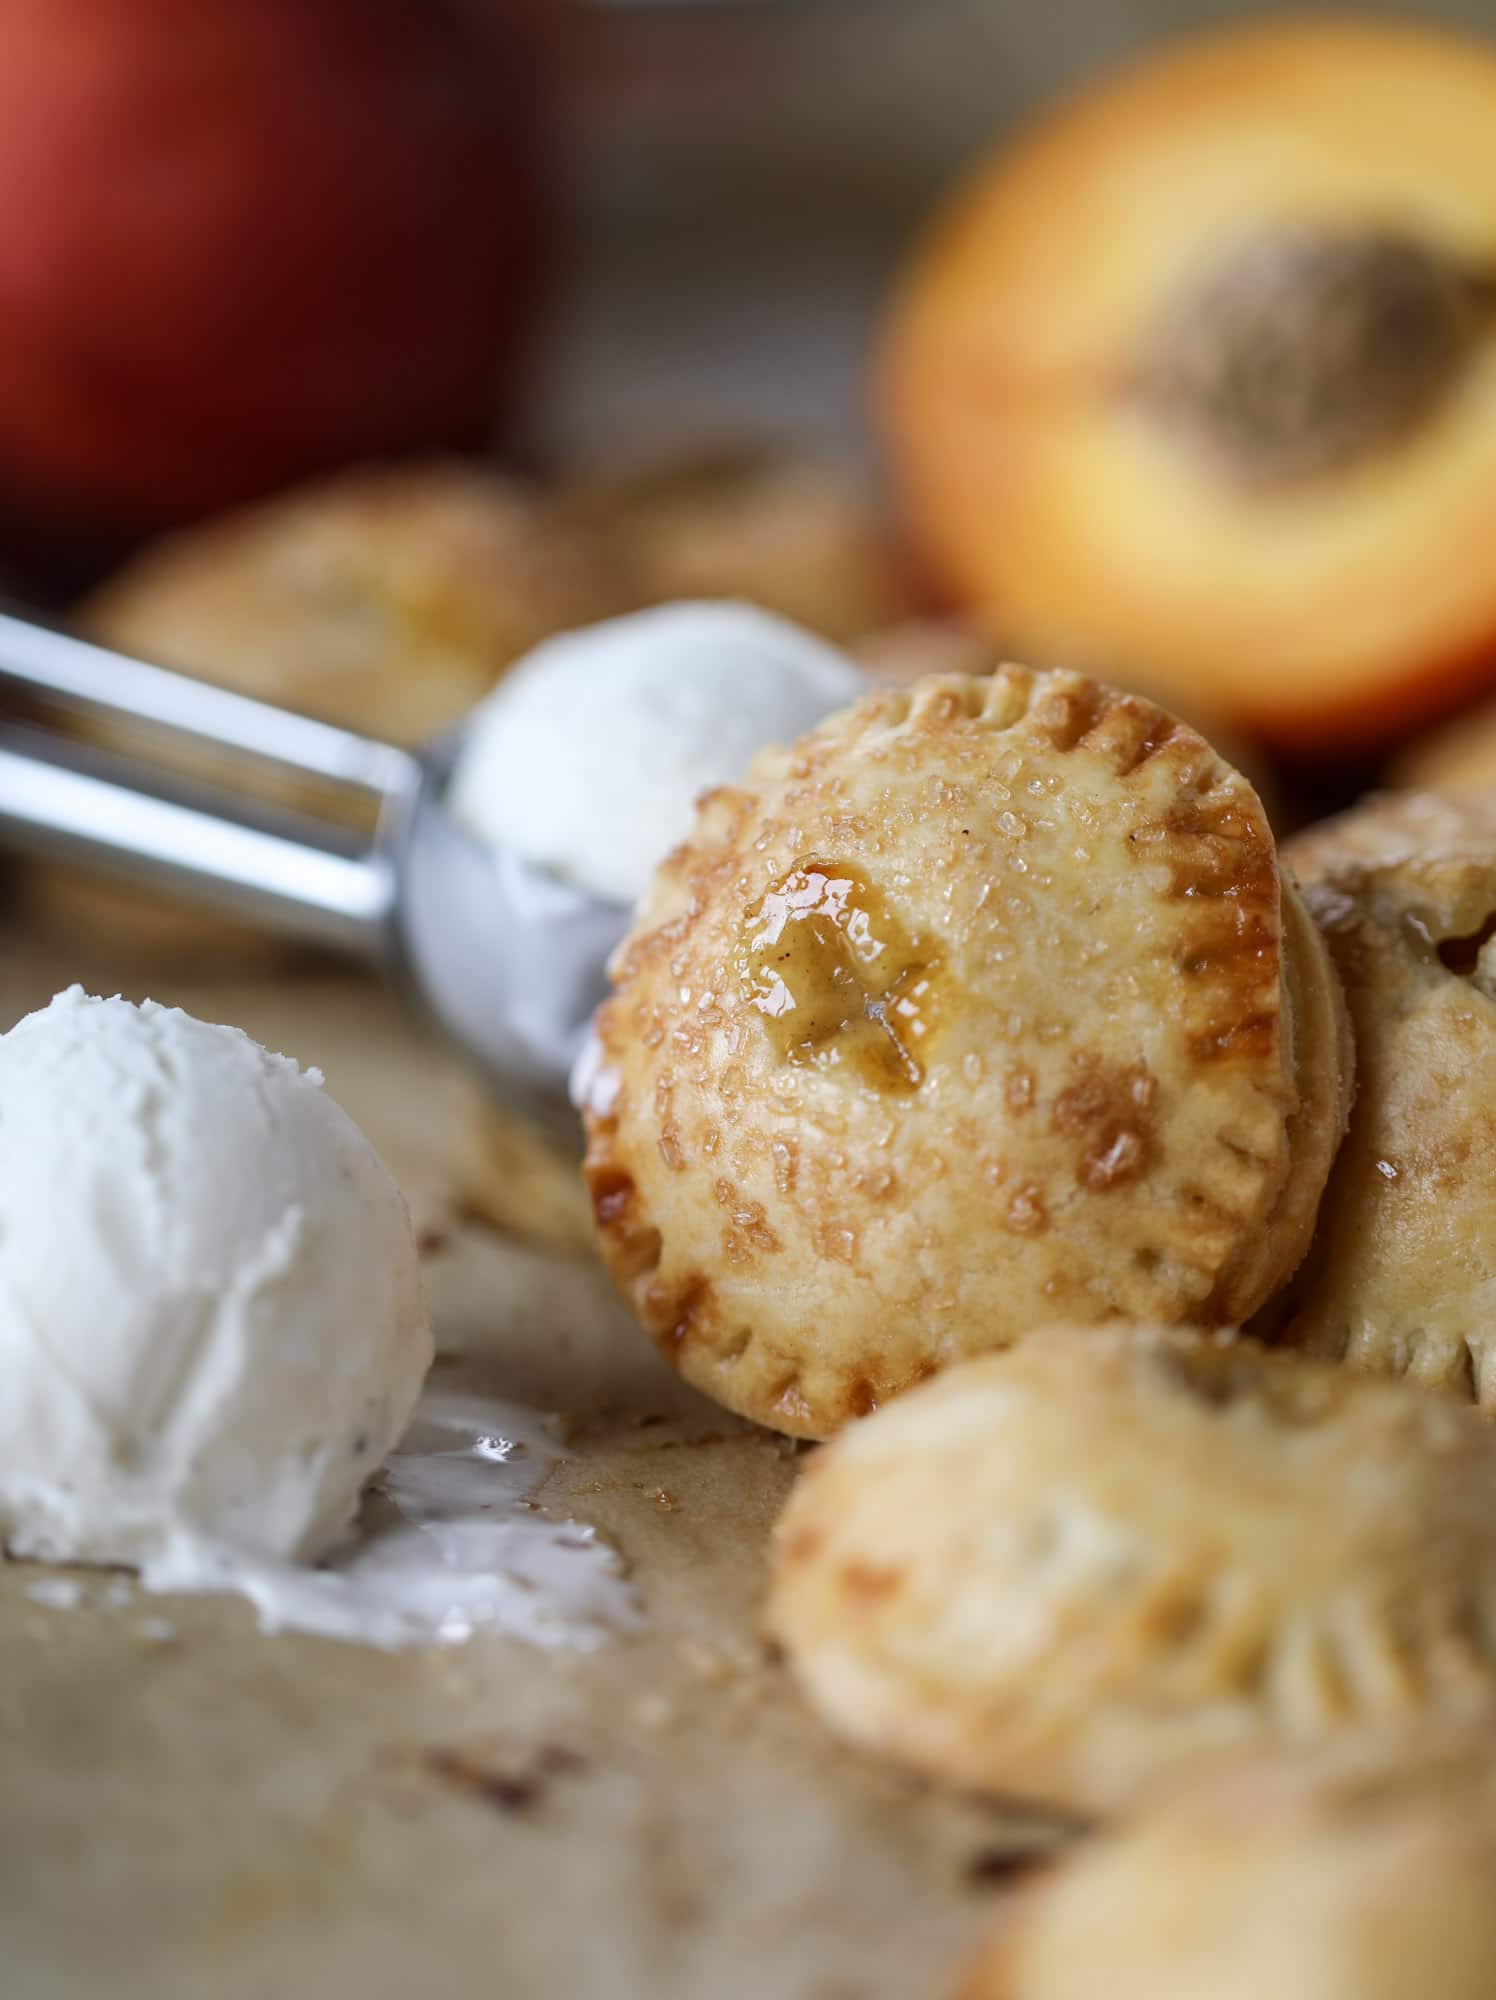 These little peach hand pies are super easy to make and oh-so delicious for summer! A warm and syrupy homemade peach filling made with brown sugar and bourbon, stuck inside a flakey all-butter crust and sprinkled with coarse sugar. SO GOOD. I howsweeteats.com #peach #hand #pies #mini #dessert #summer